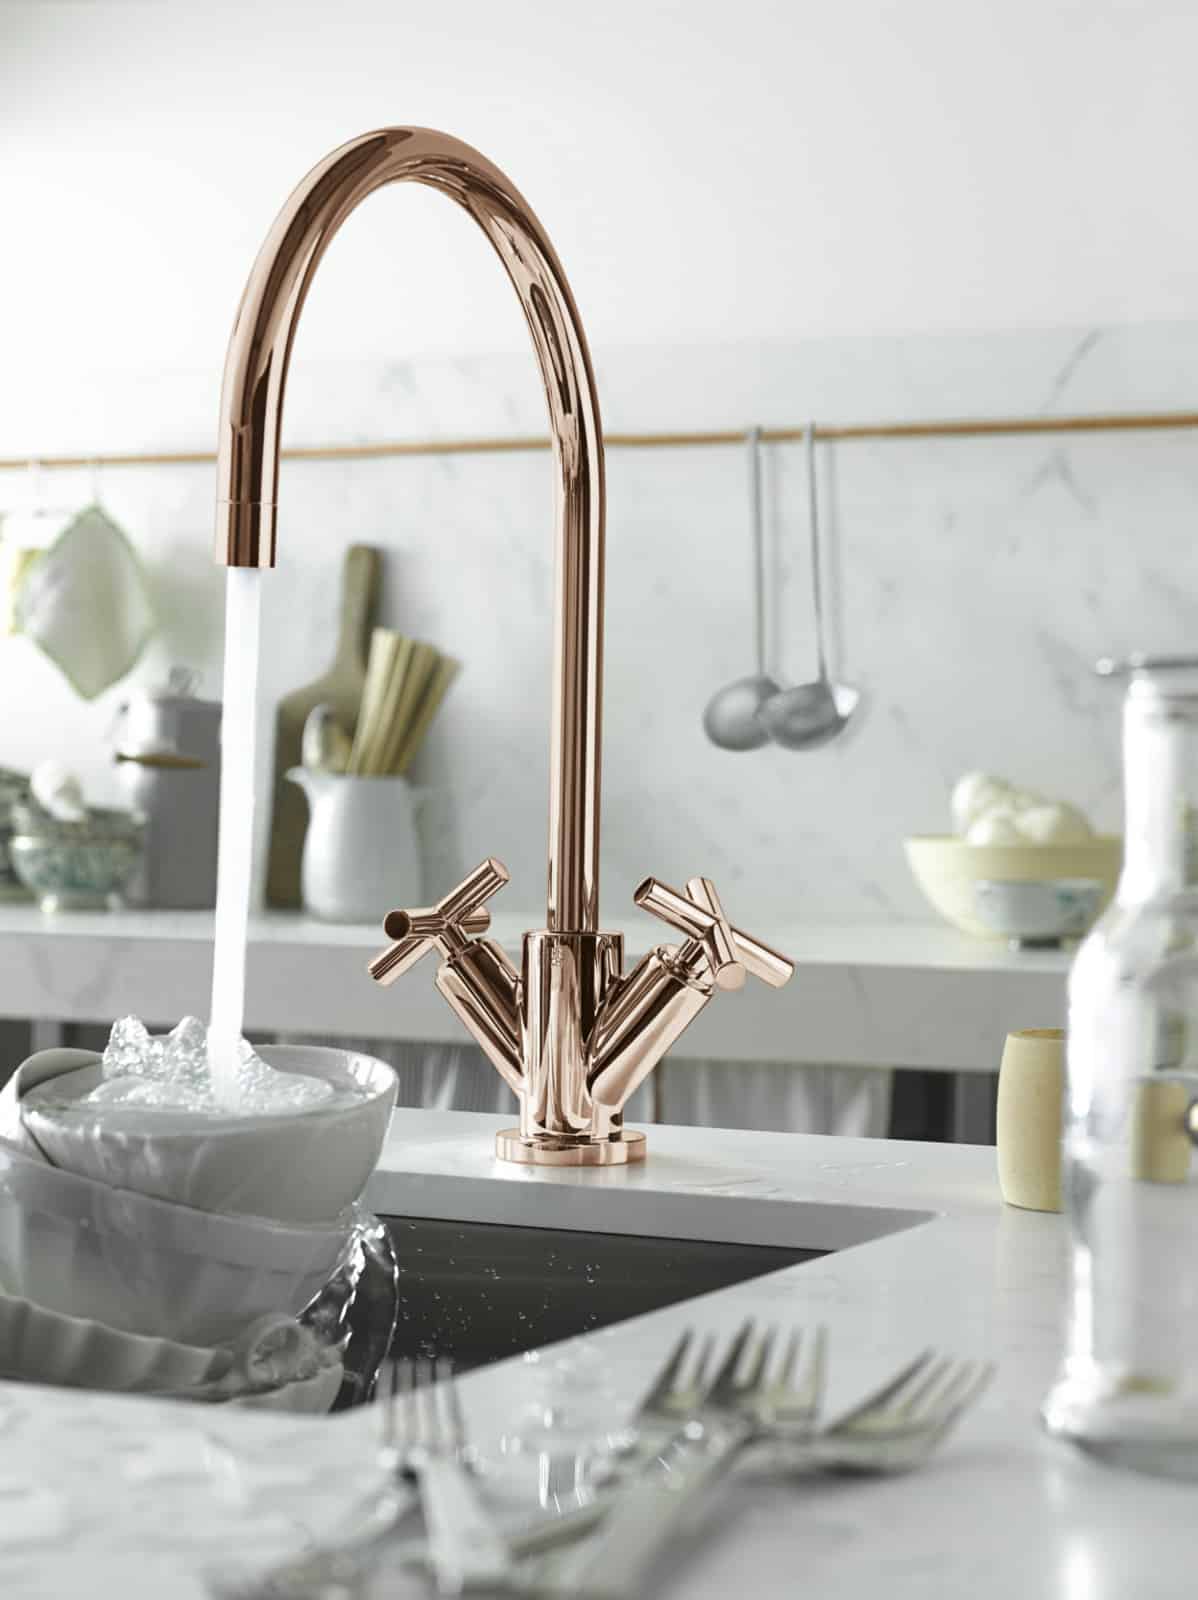 Golden handles are great if you want an understated metallic feel